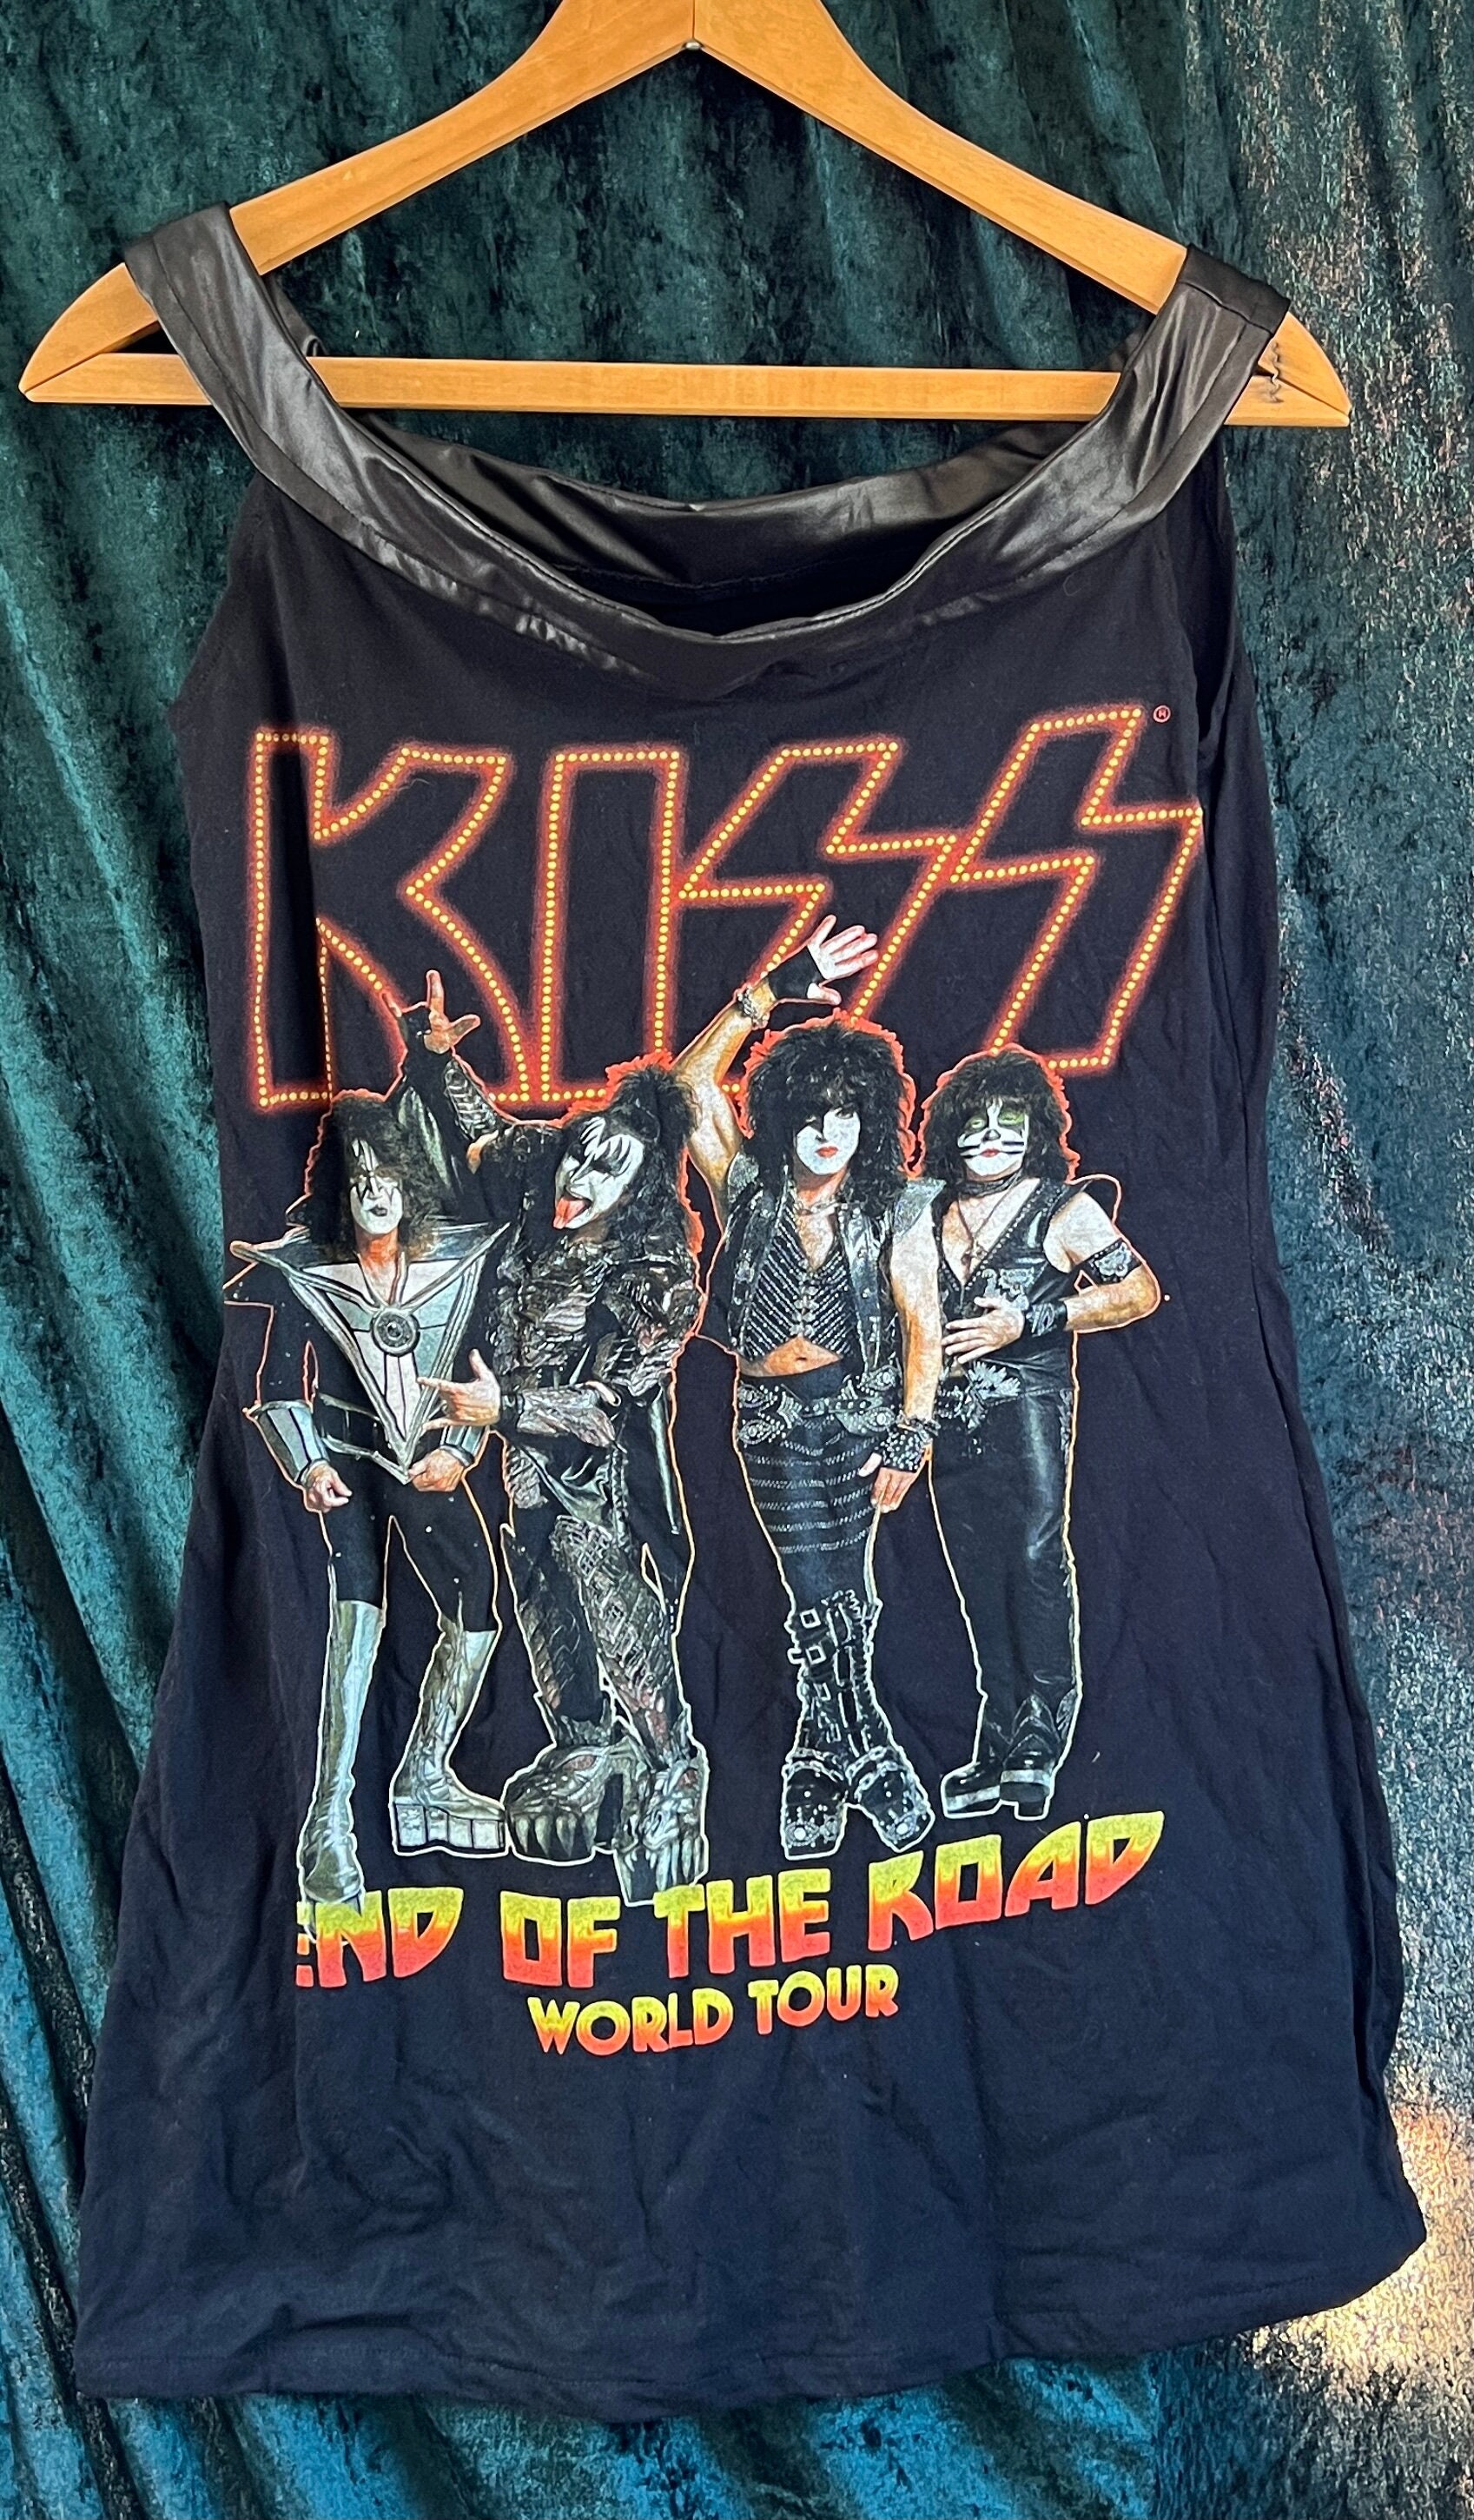 Hot New Kiss Tour Dates 2023 End of The Road Black S-3xl T-Shirt Gift Fans